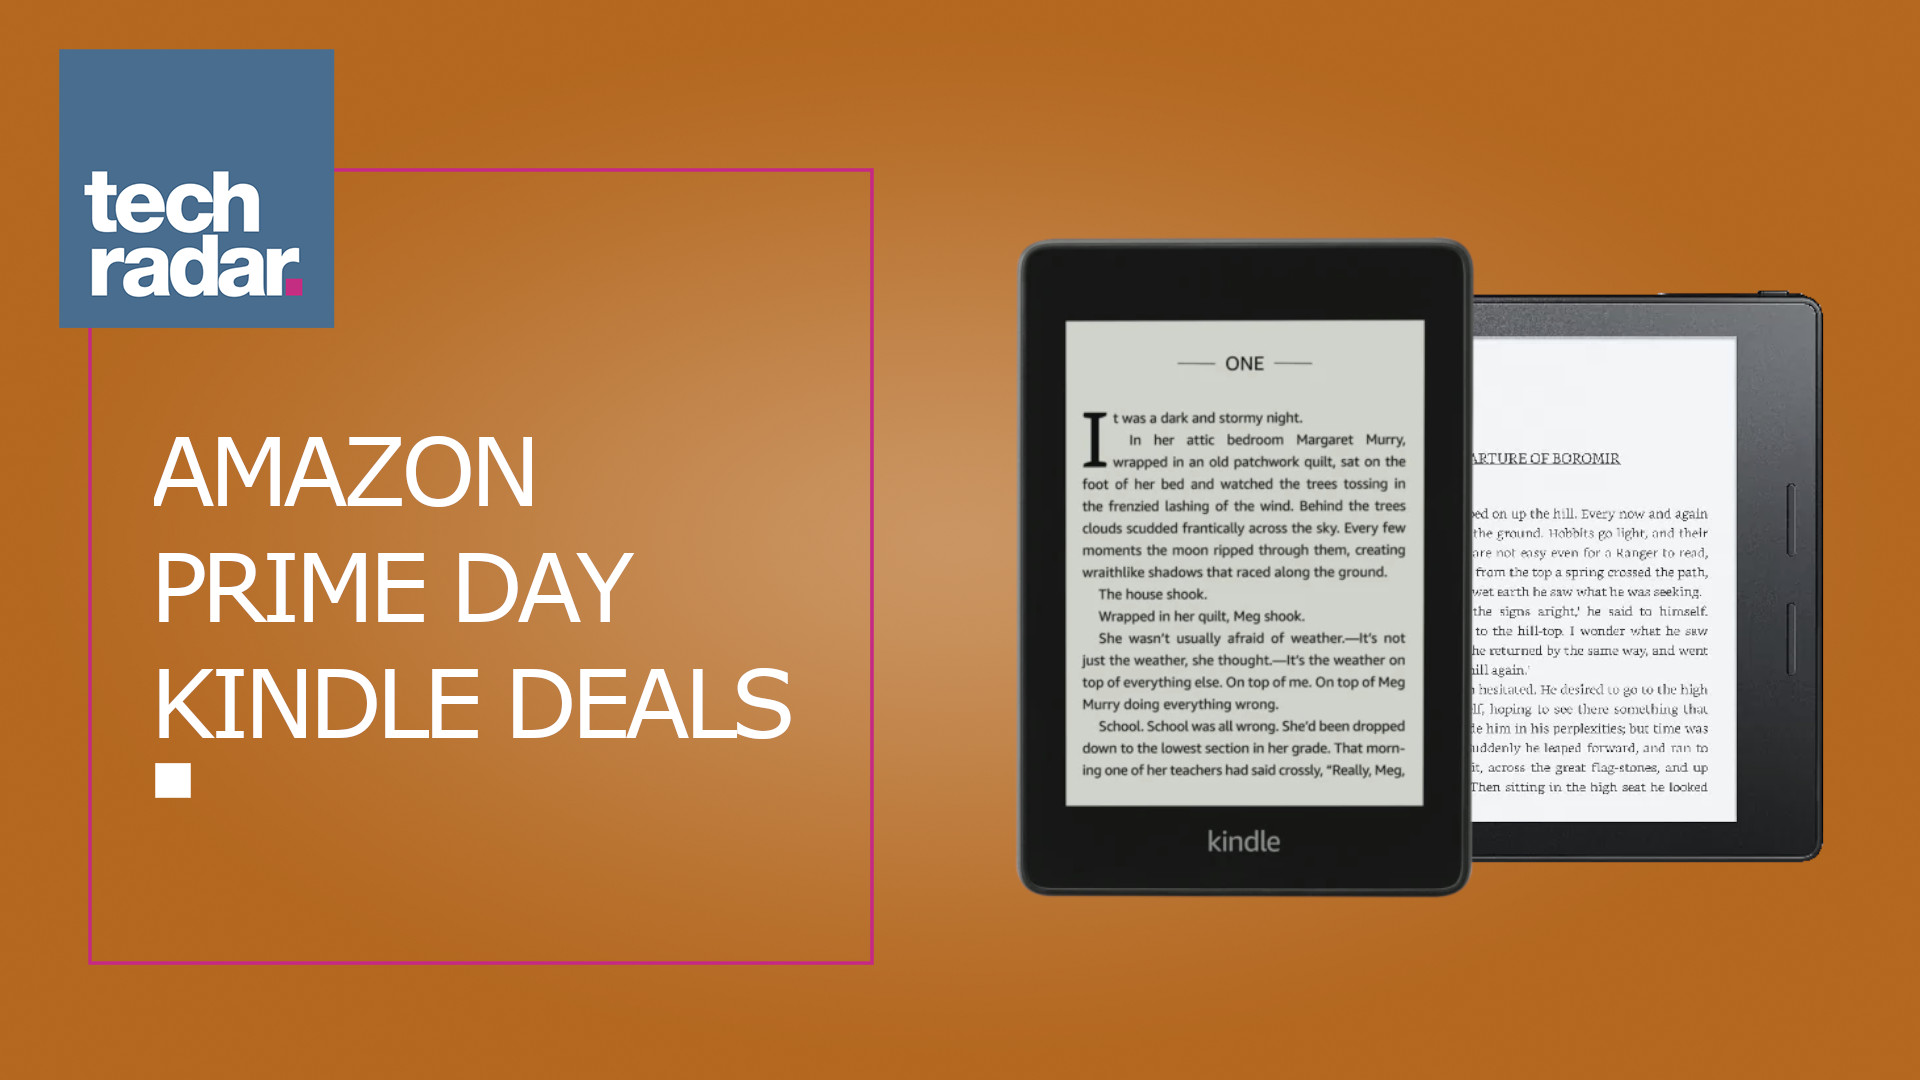 Amazon Prime Day Kindle deals 2021 Prime Day is over for another year